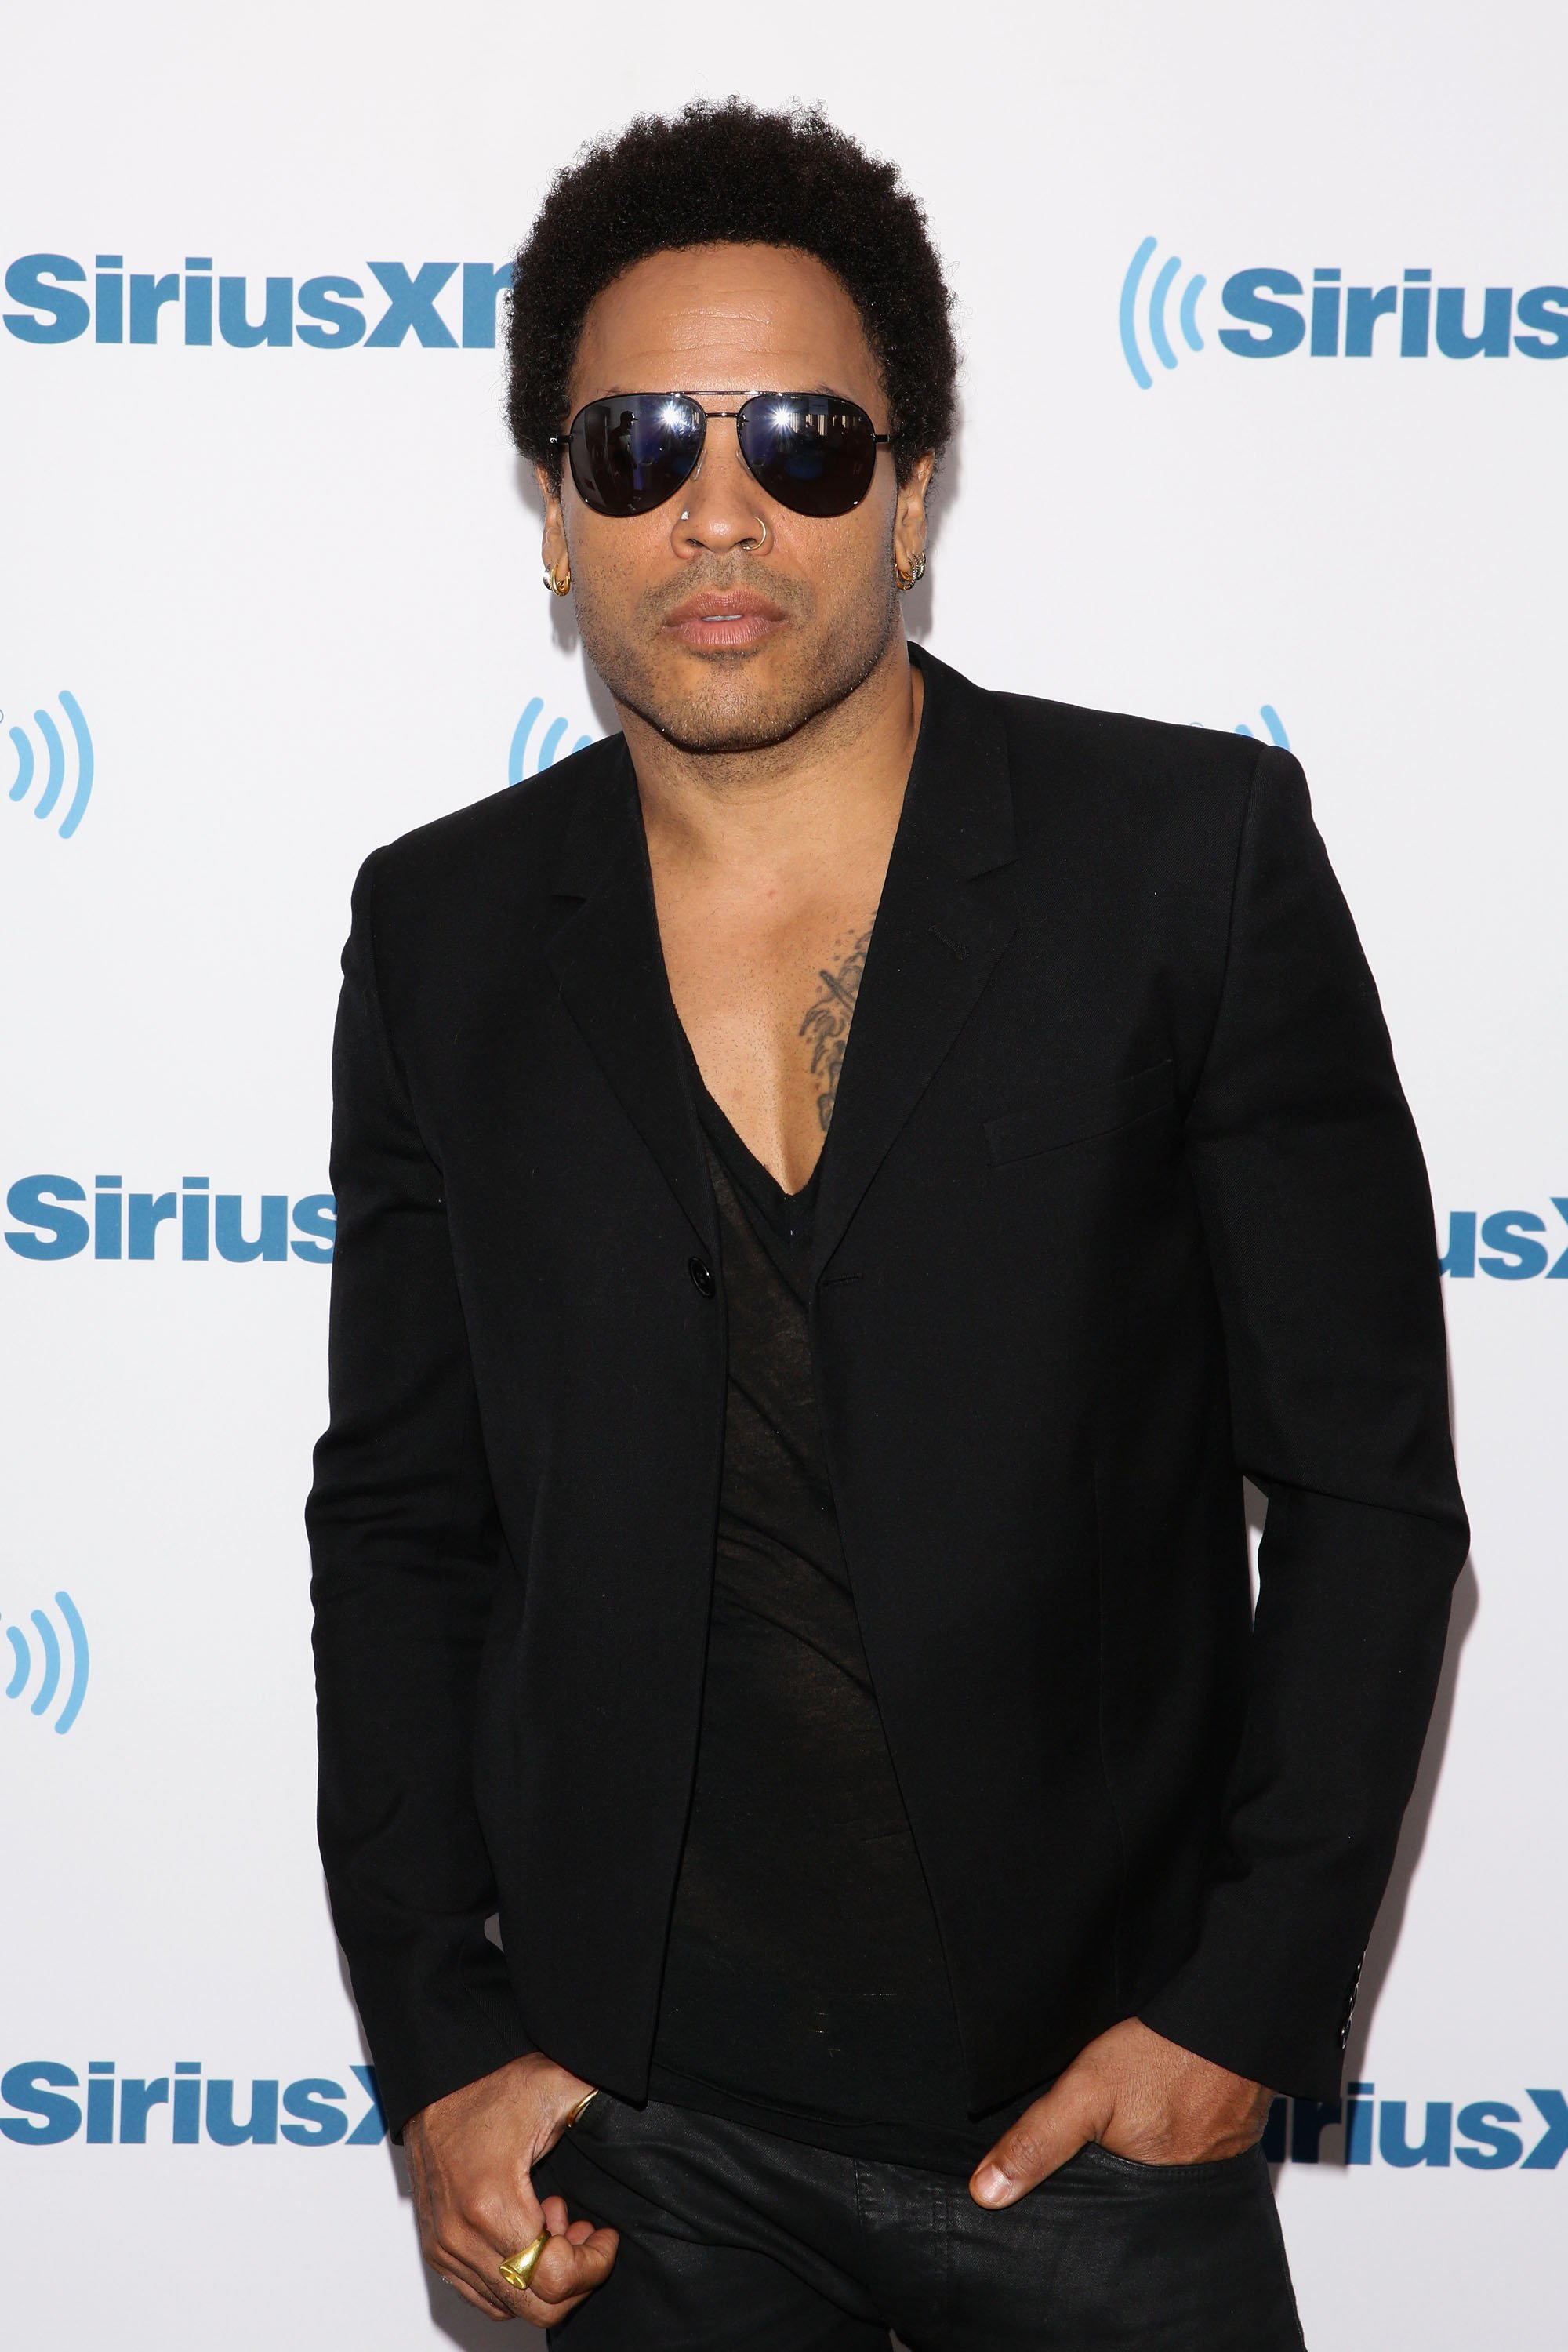 Lenny Kravitz during his 2014 visit in the SiriusXM Studios in New York City. | Photo: Getty Images